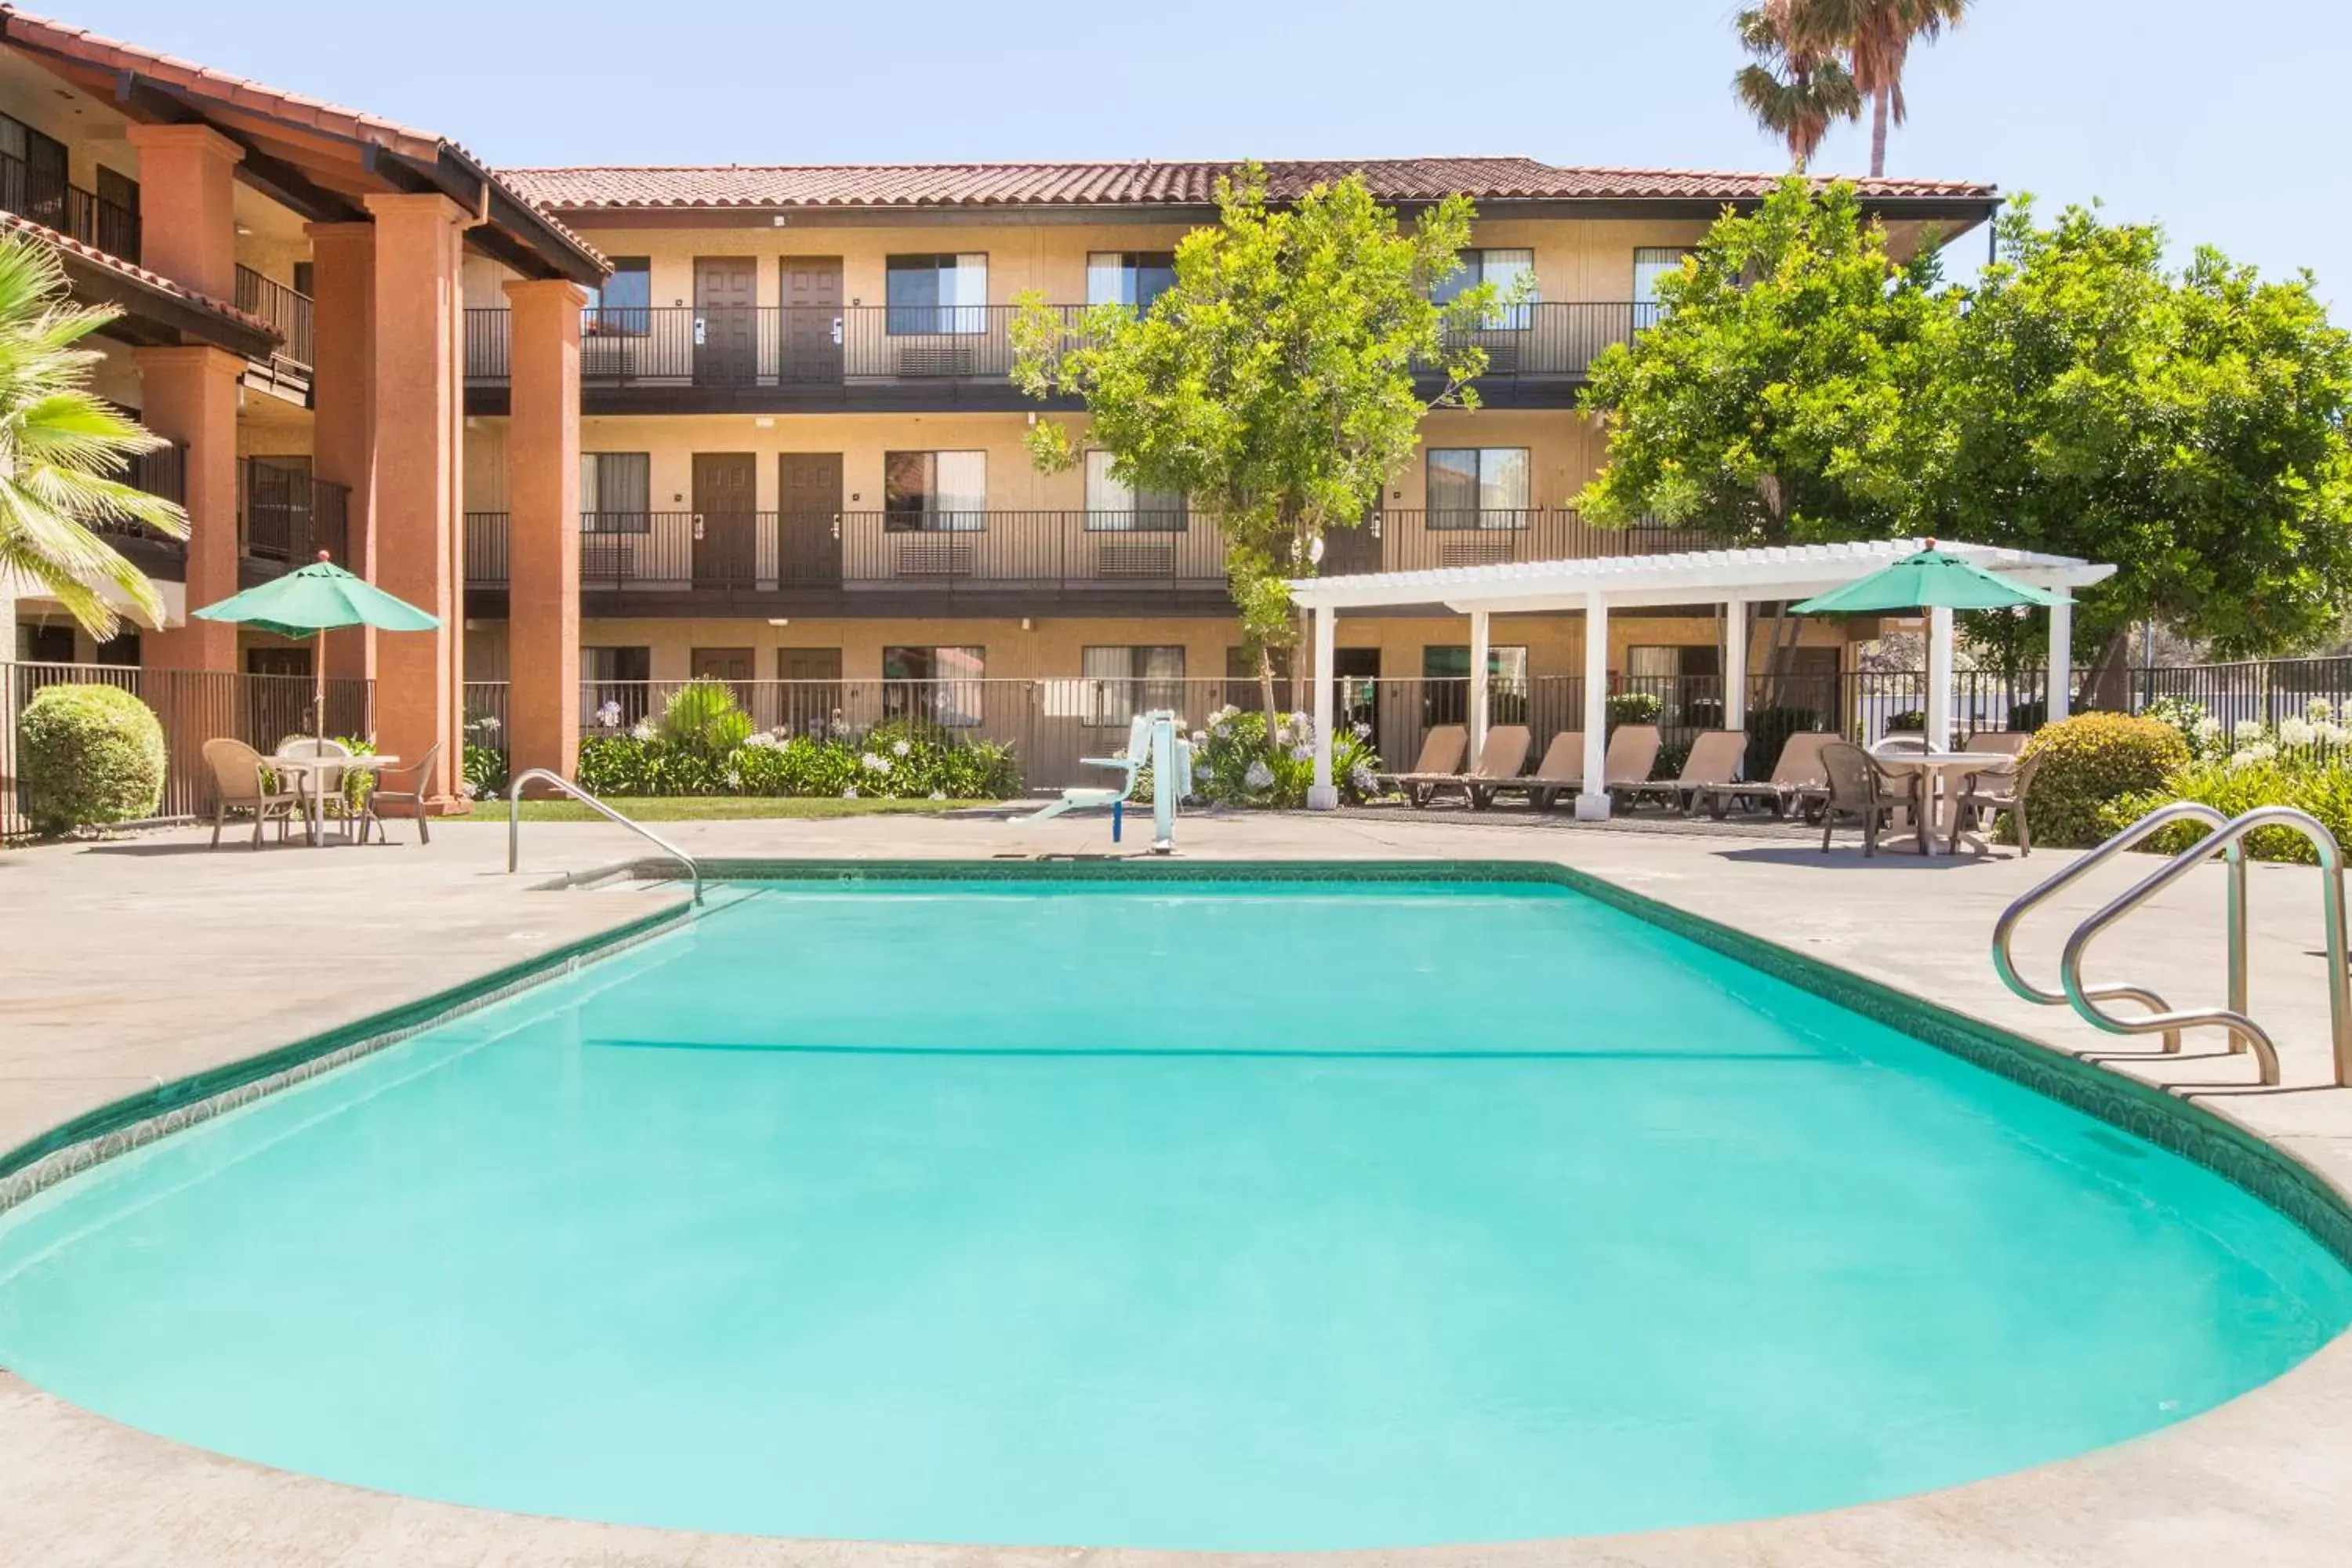 Property building, Swimming Pool in Days Inn by Wyndham San Jose Airport